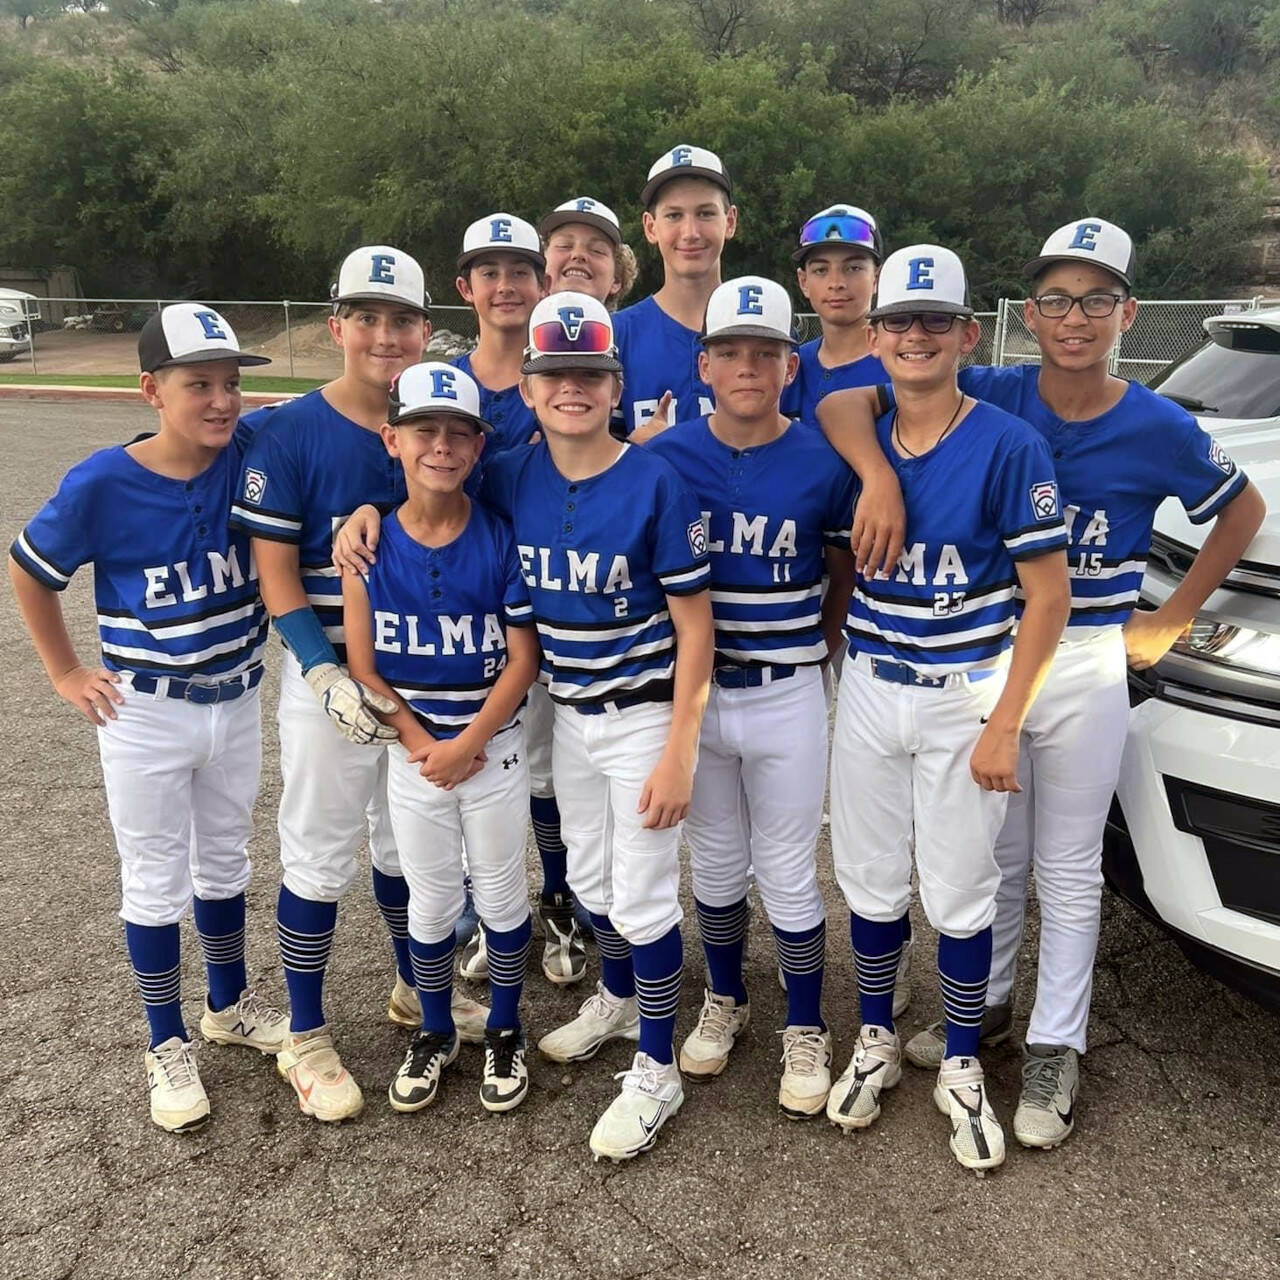 PHOTO COURTESY OF ELMA LITLE LEAGUE 
The Elma Little League Intermediate all-stars fell 7-6 to Woodland (Northern California) in the West Regional quarterfinal round on Tuesday in Nogales, Arizona, ending their postseason run.